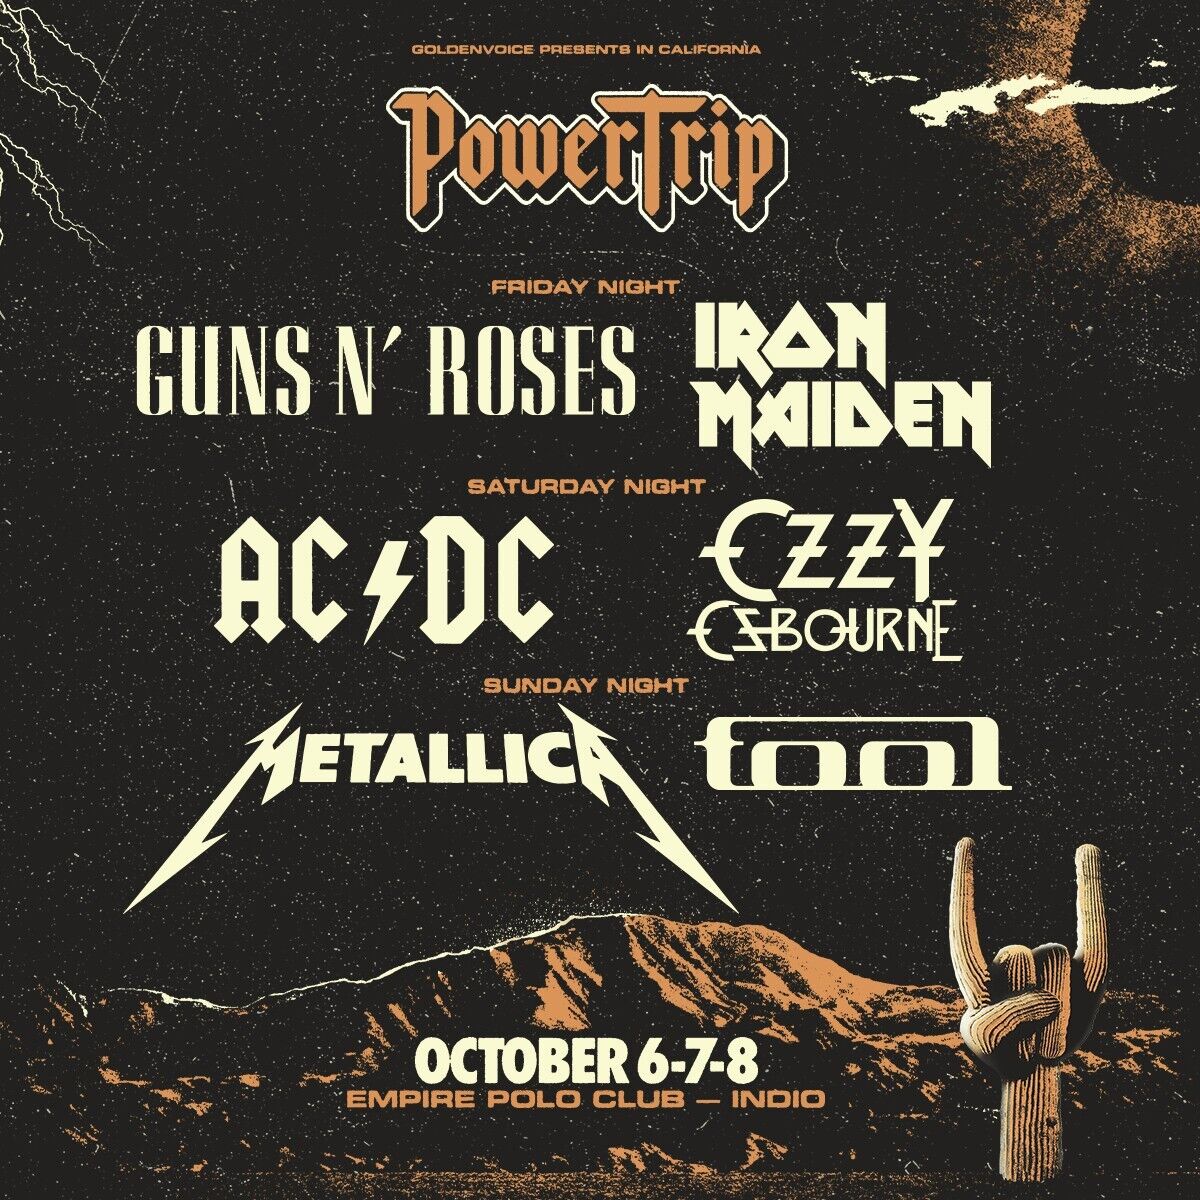 3 Day Passes to the Power Trip Festival in Indio, California